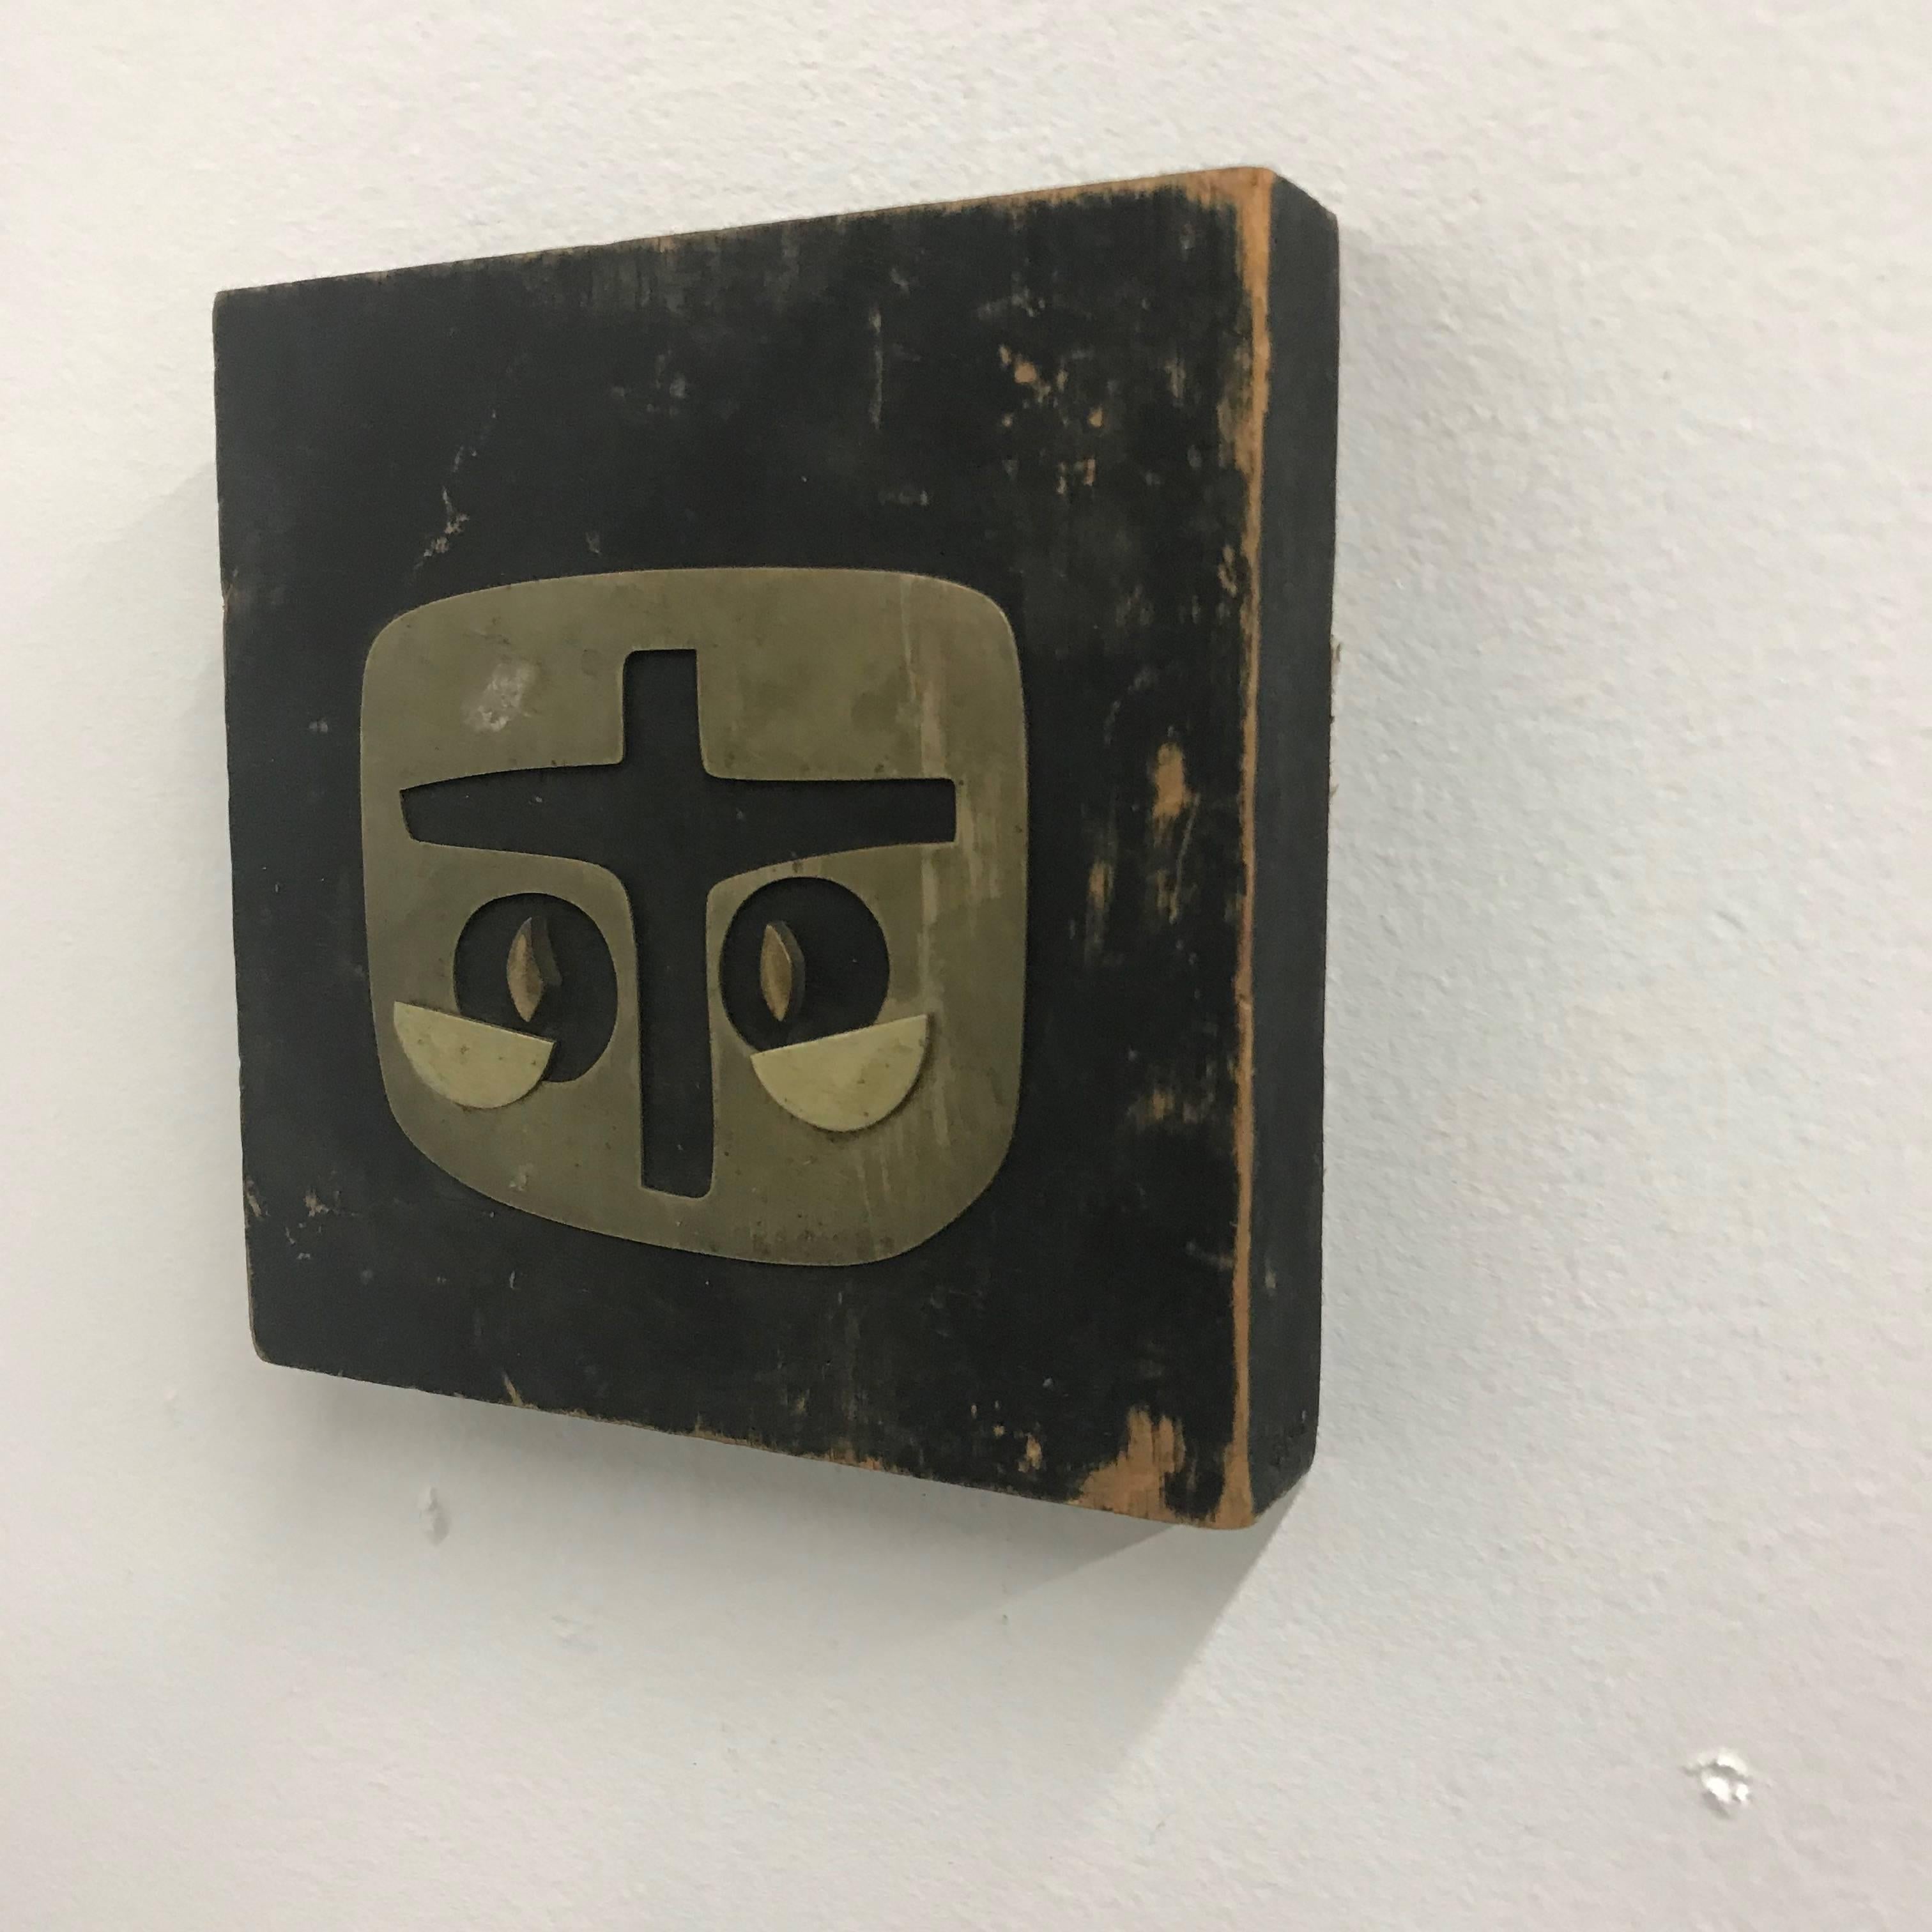 For your consideration a vintage by Mid-Century Modern Emaus wall plaque abstract cross.
Mexico, circa 1970s. 
Dimensions: 4 3/4